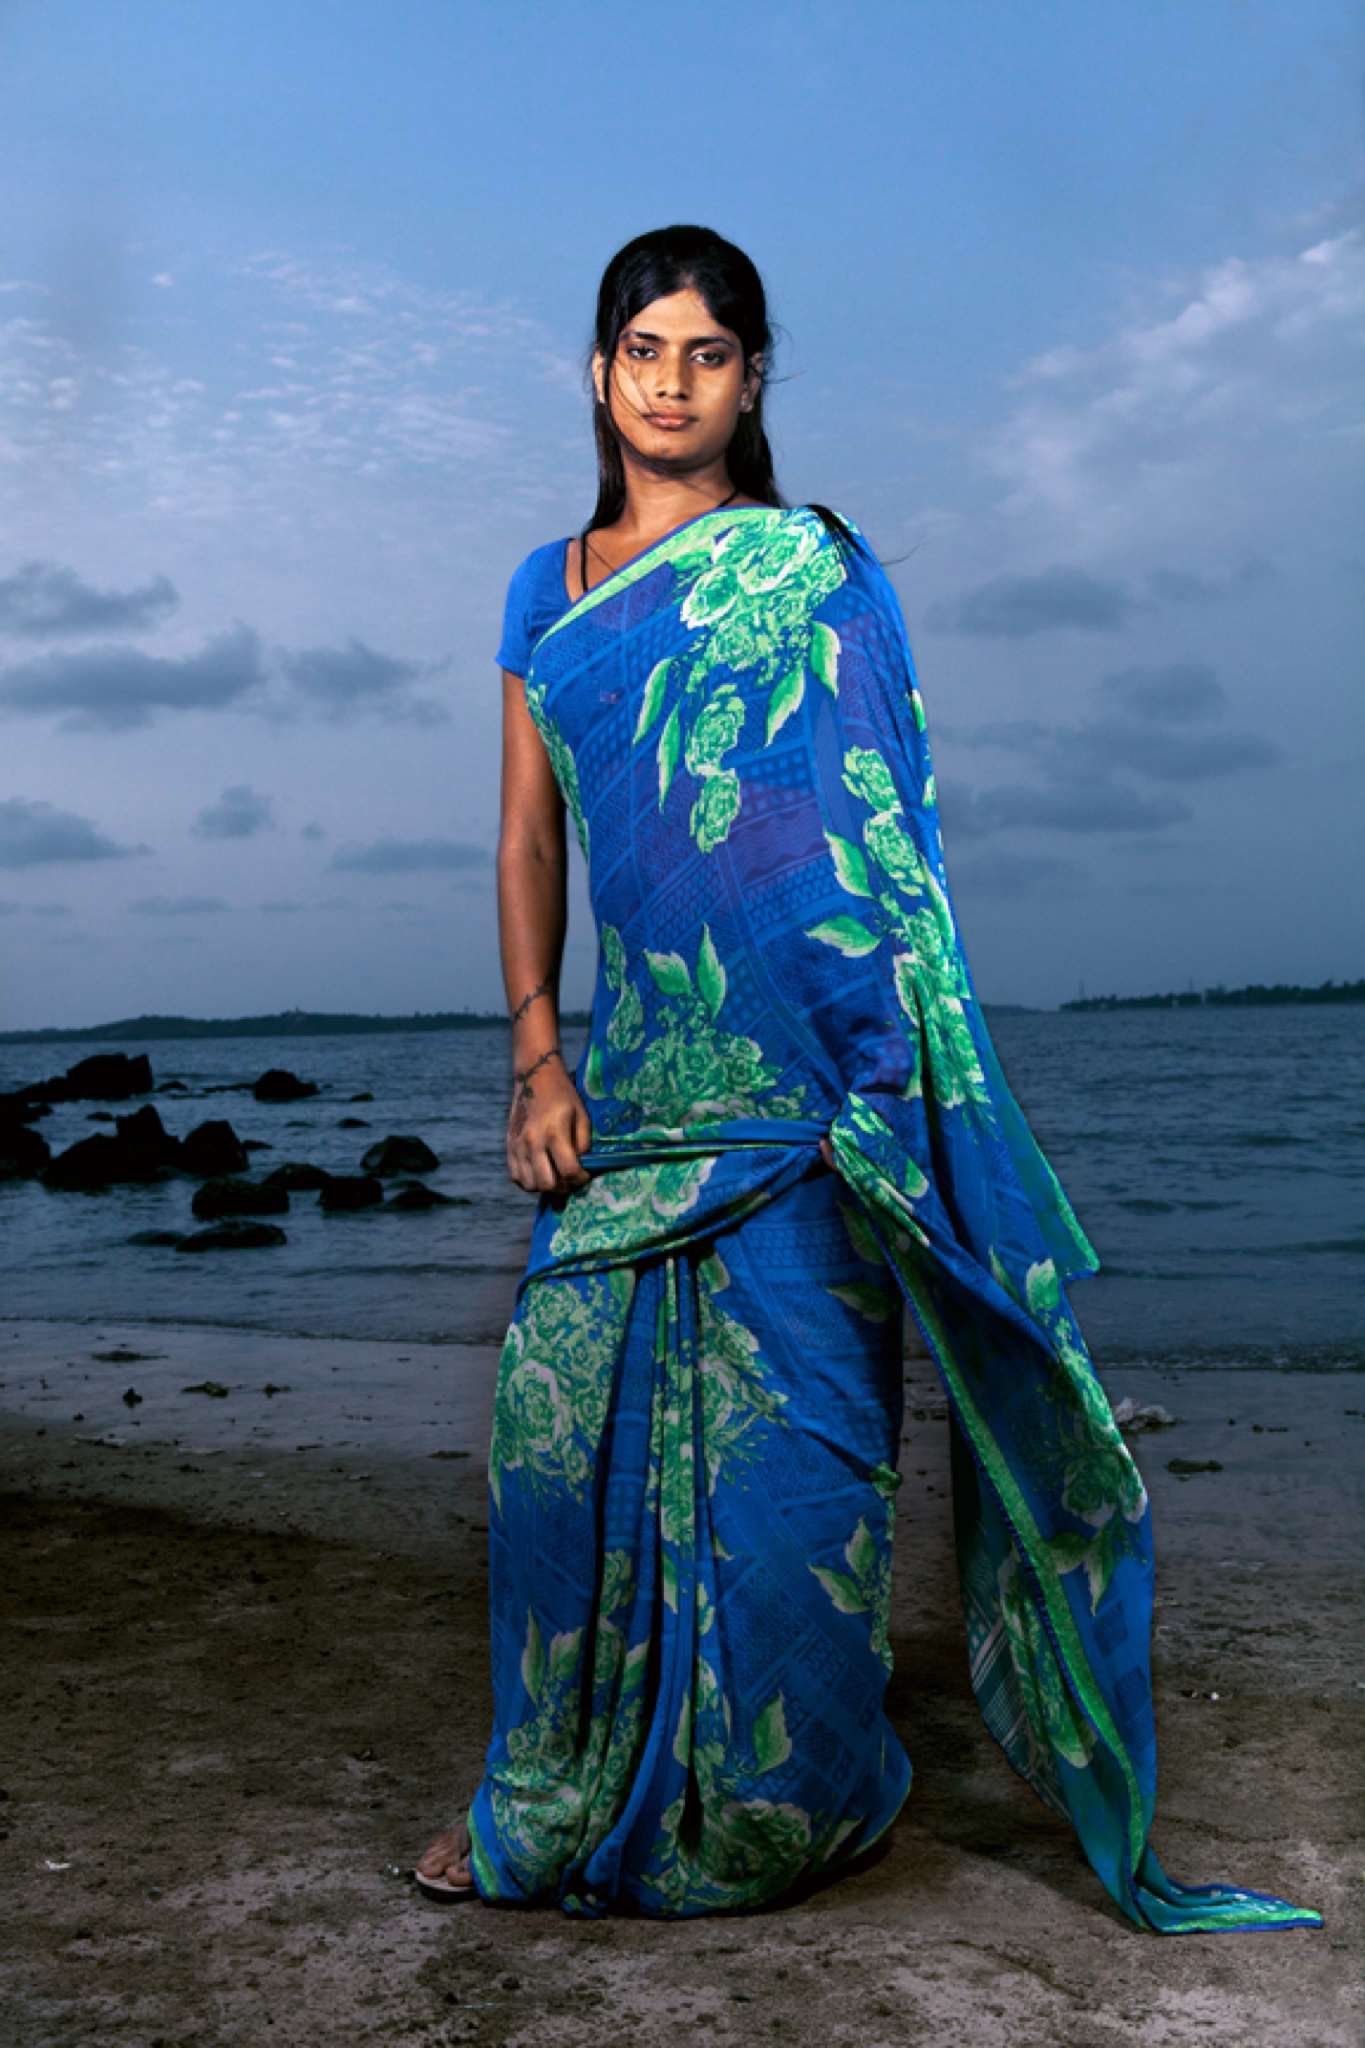 These Stunning Photographs Of The Third Gender Will Make